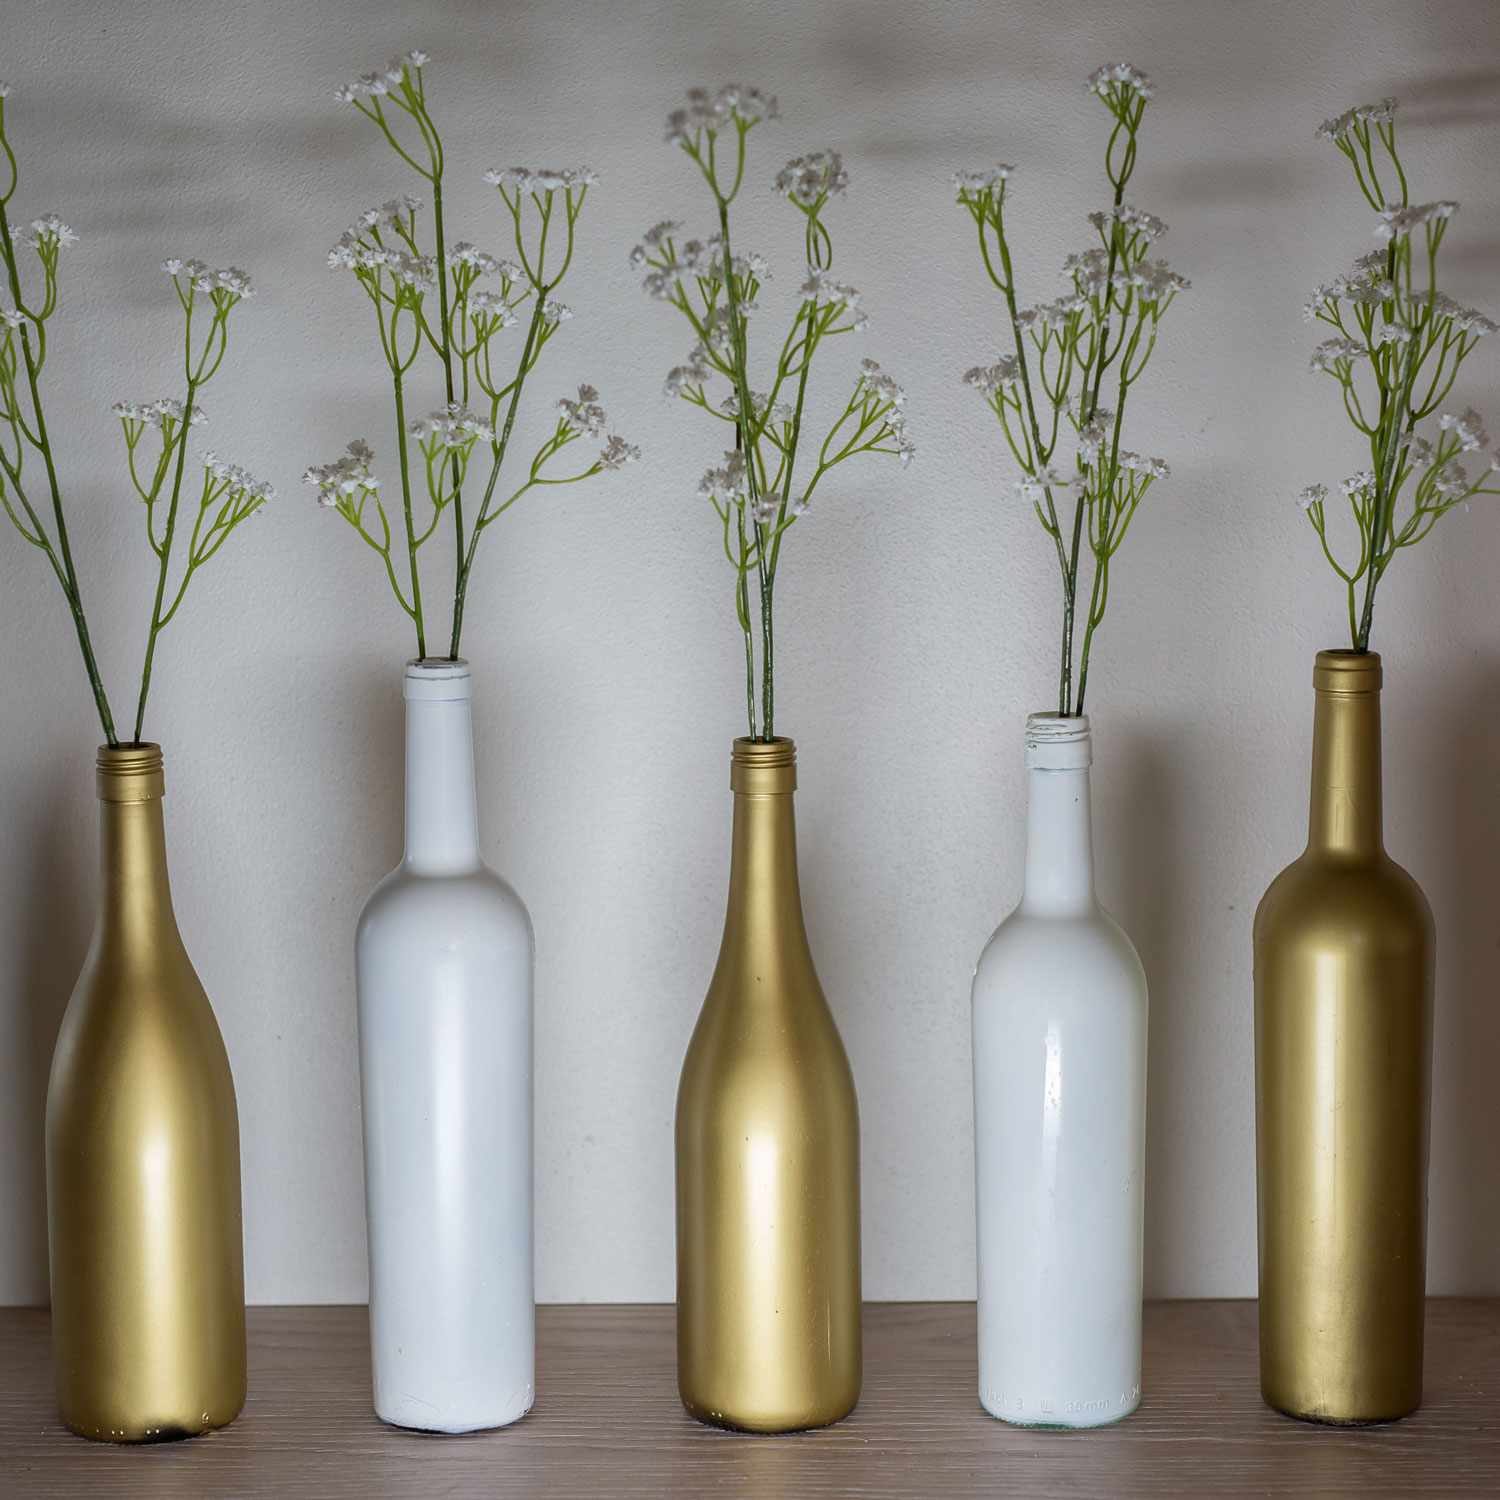 Make a Centerpiece for Your Table